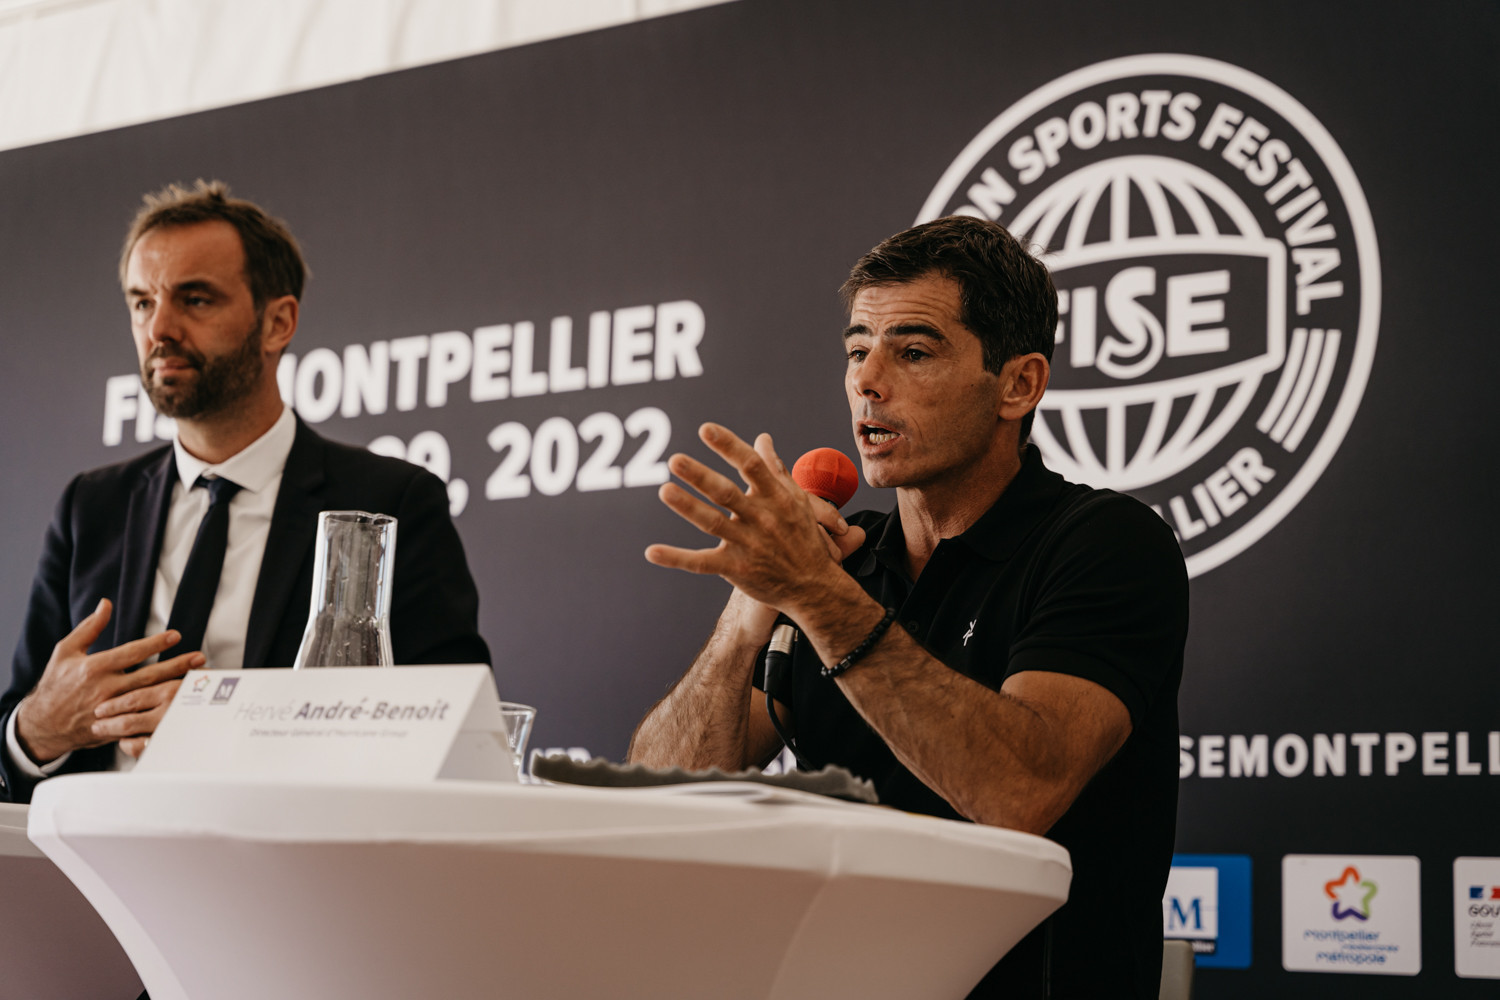 Hervé André-Benoît's primary aims for FISE are to generate more exposure and revenue for urban sports, thus increasing their popularity ©Hurricane - FISE